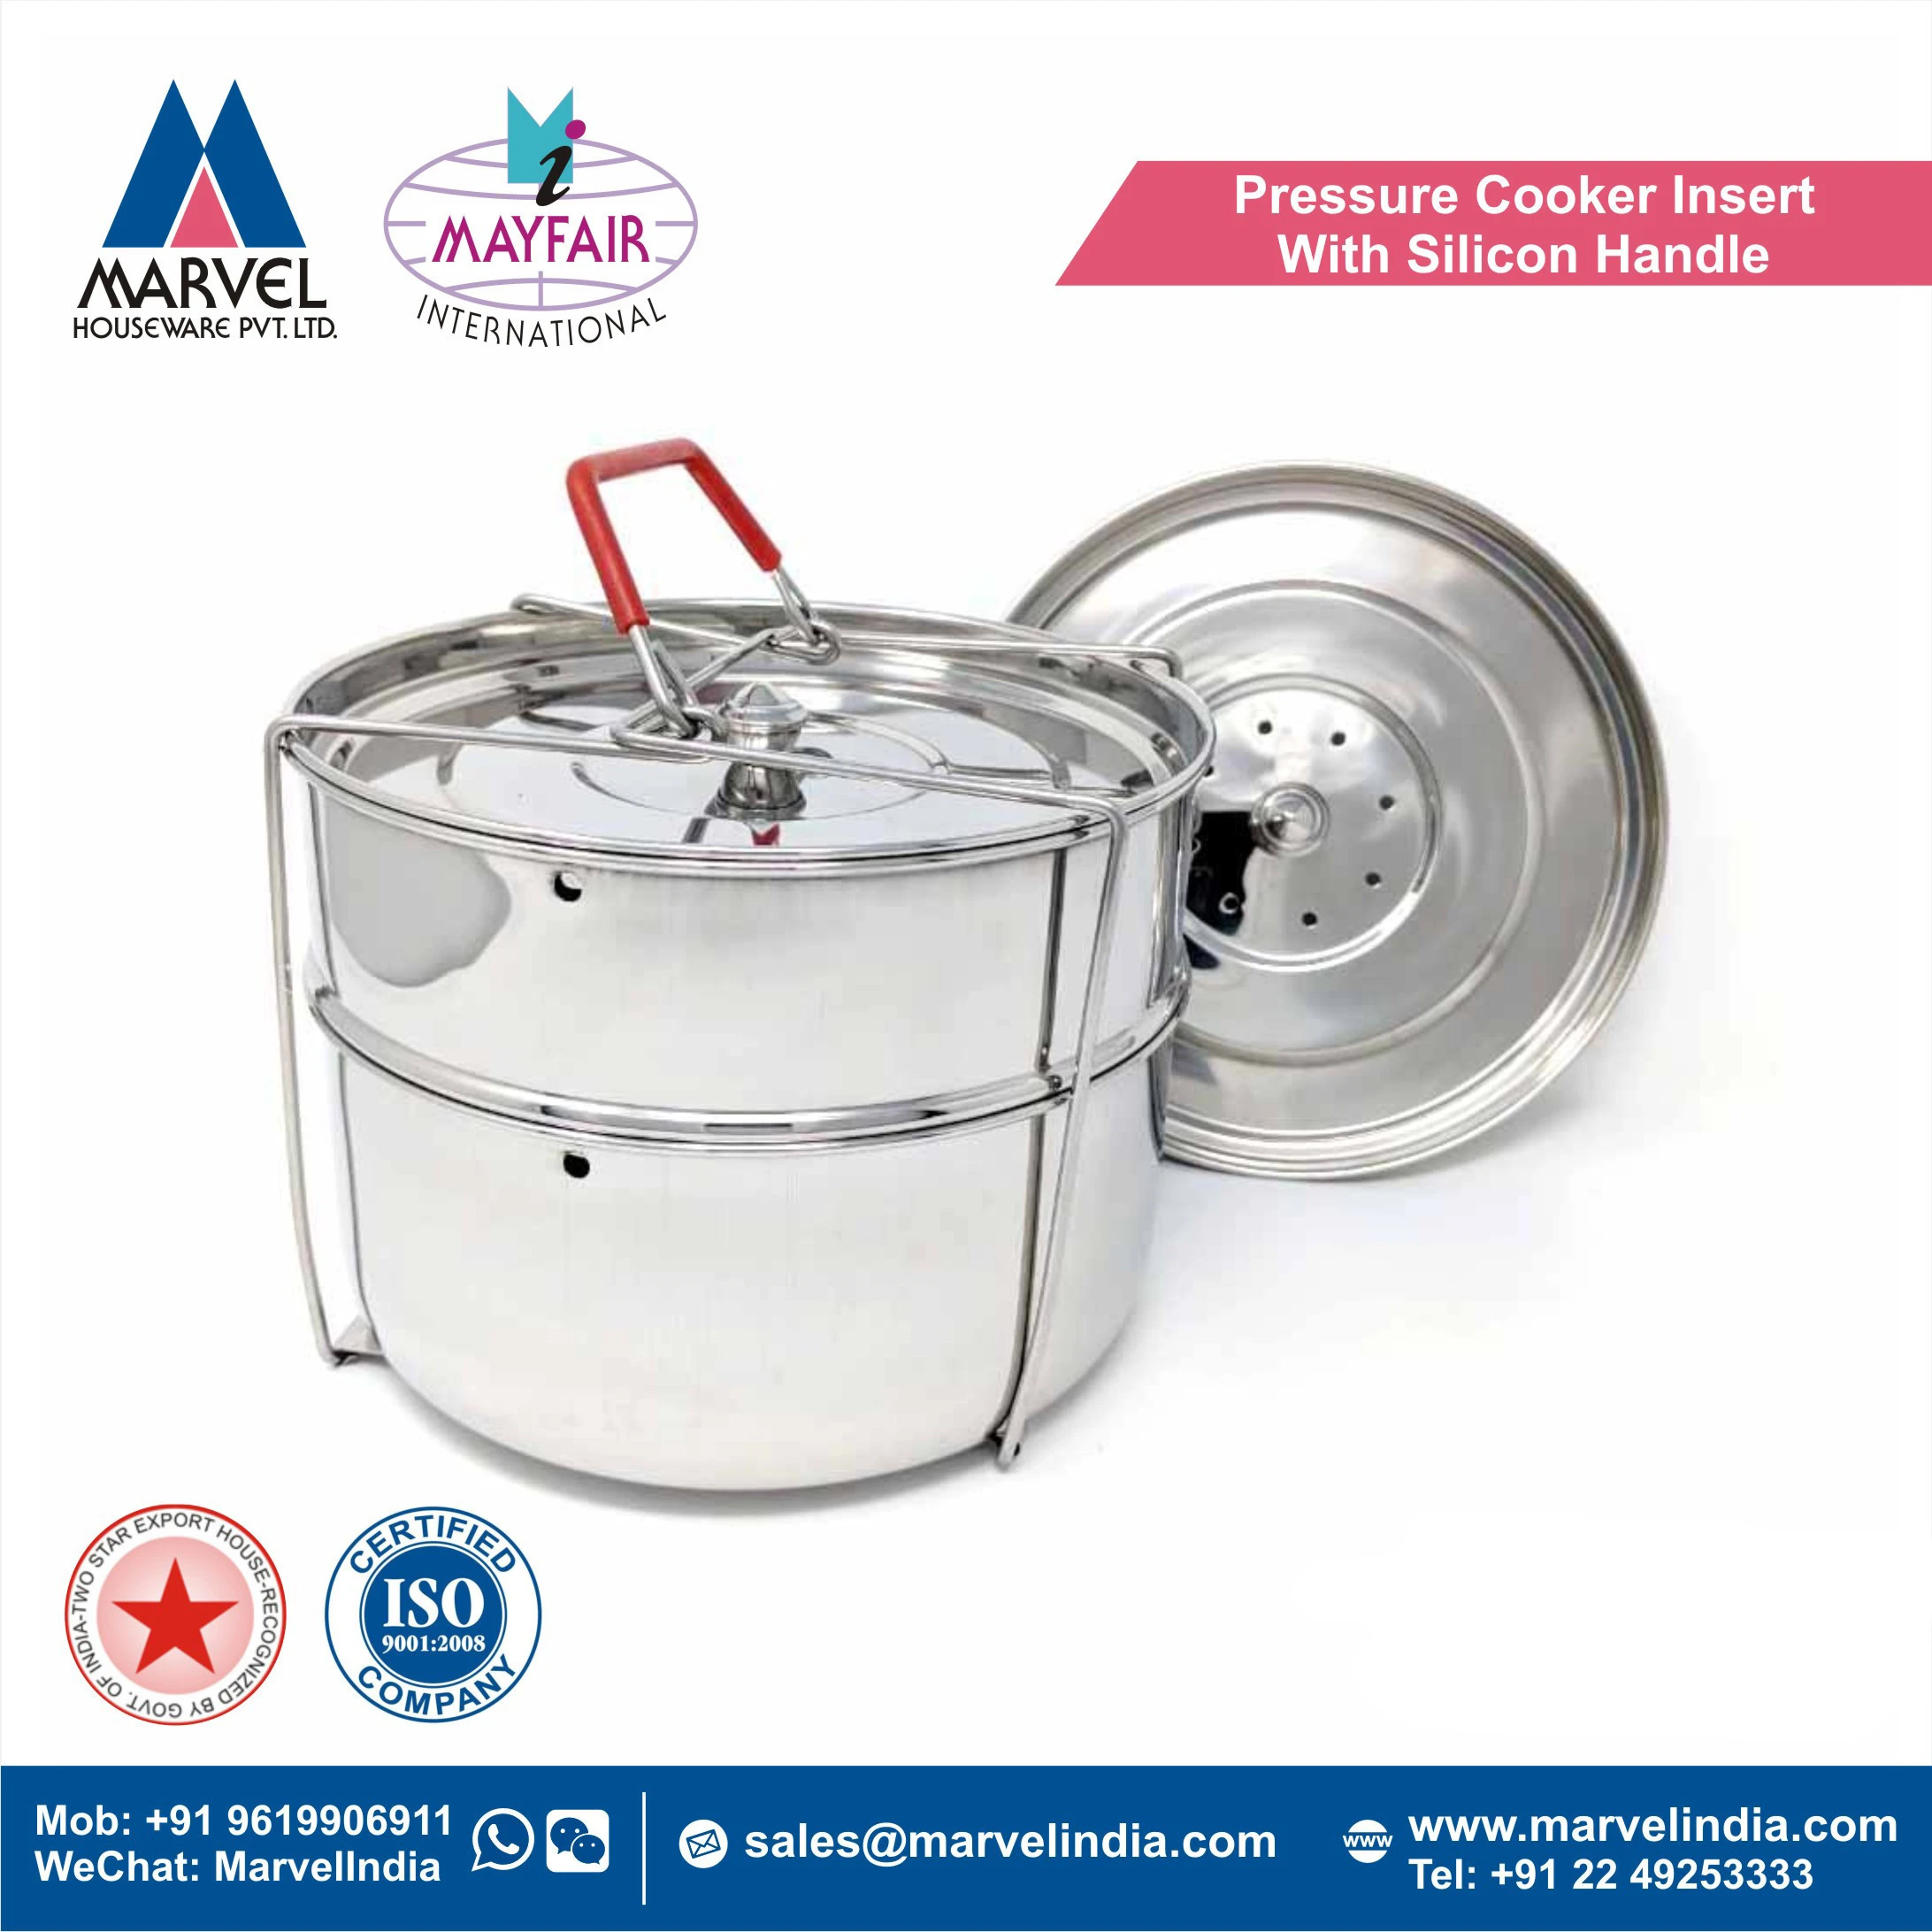 Pressure Cooker Insert With Silicon Handle